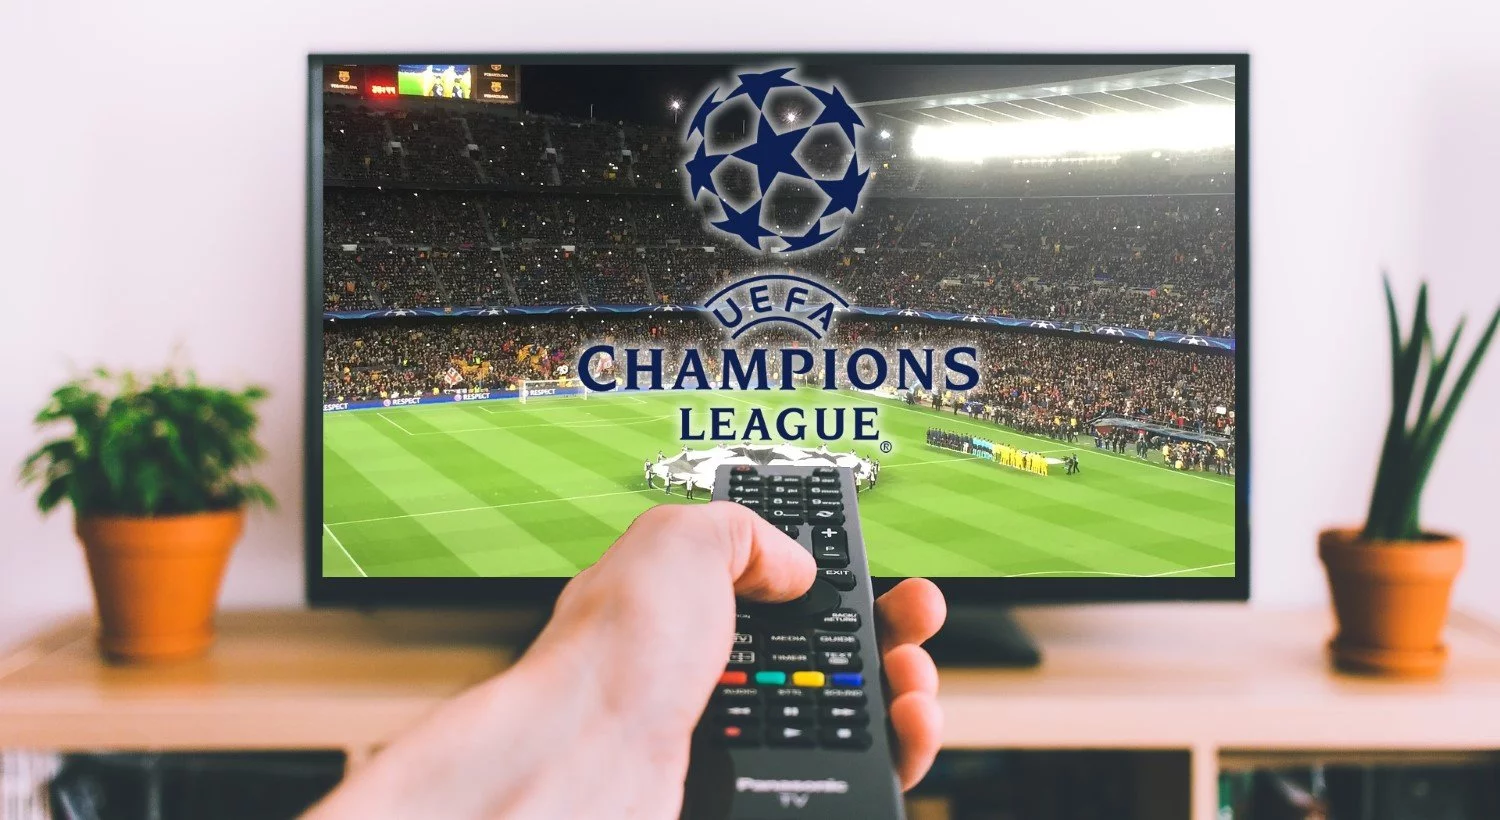 Champions League TV Guide Streaming